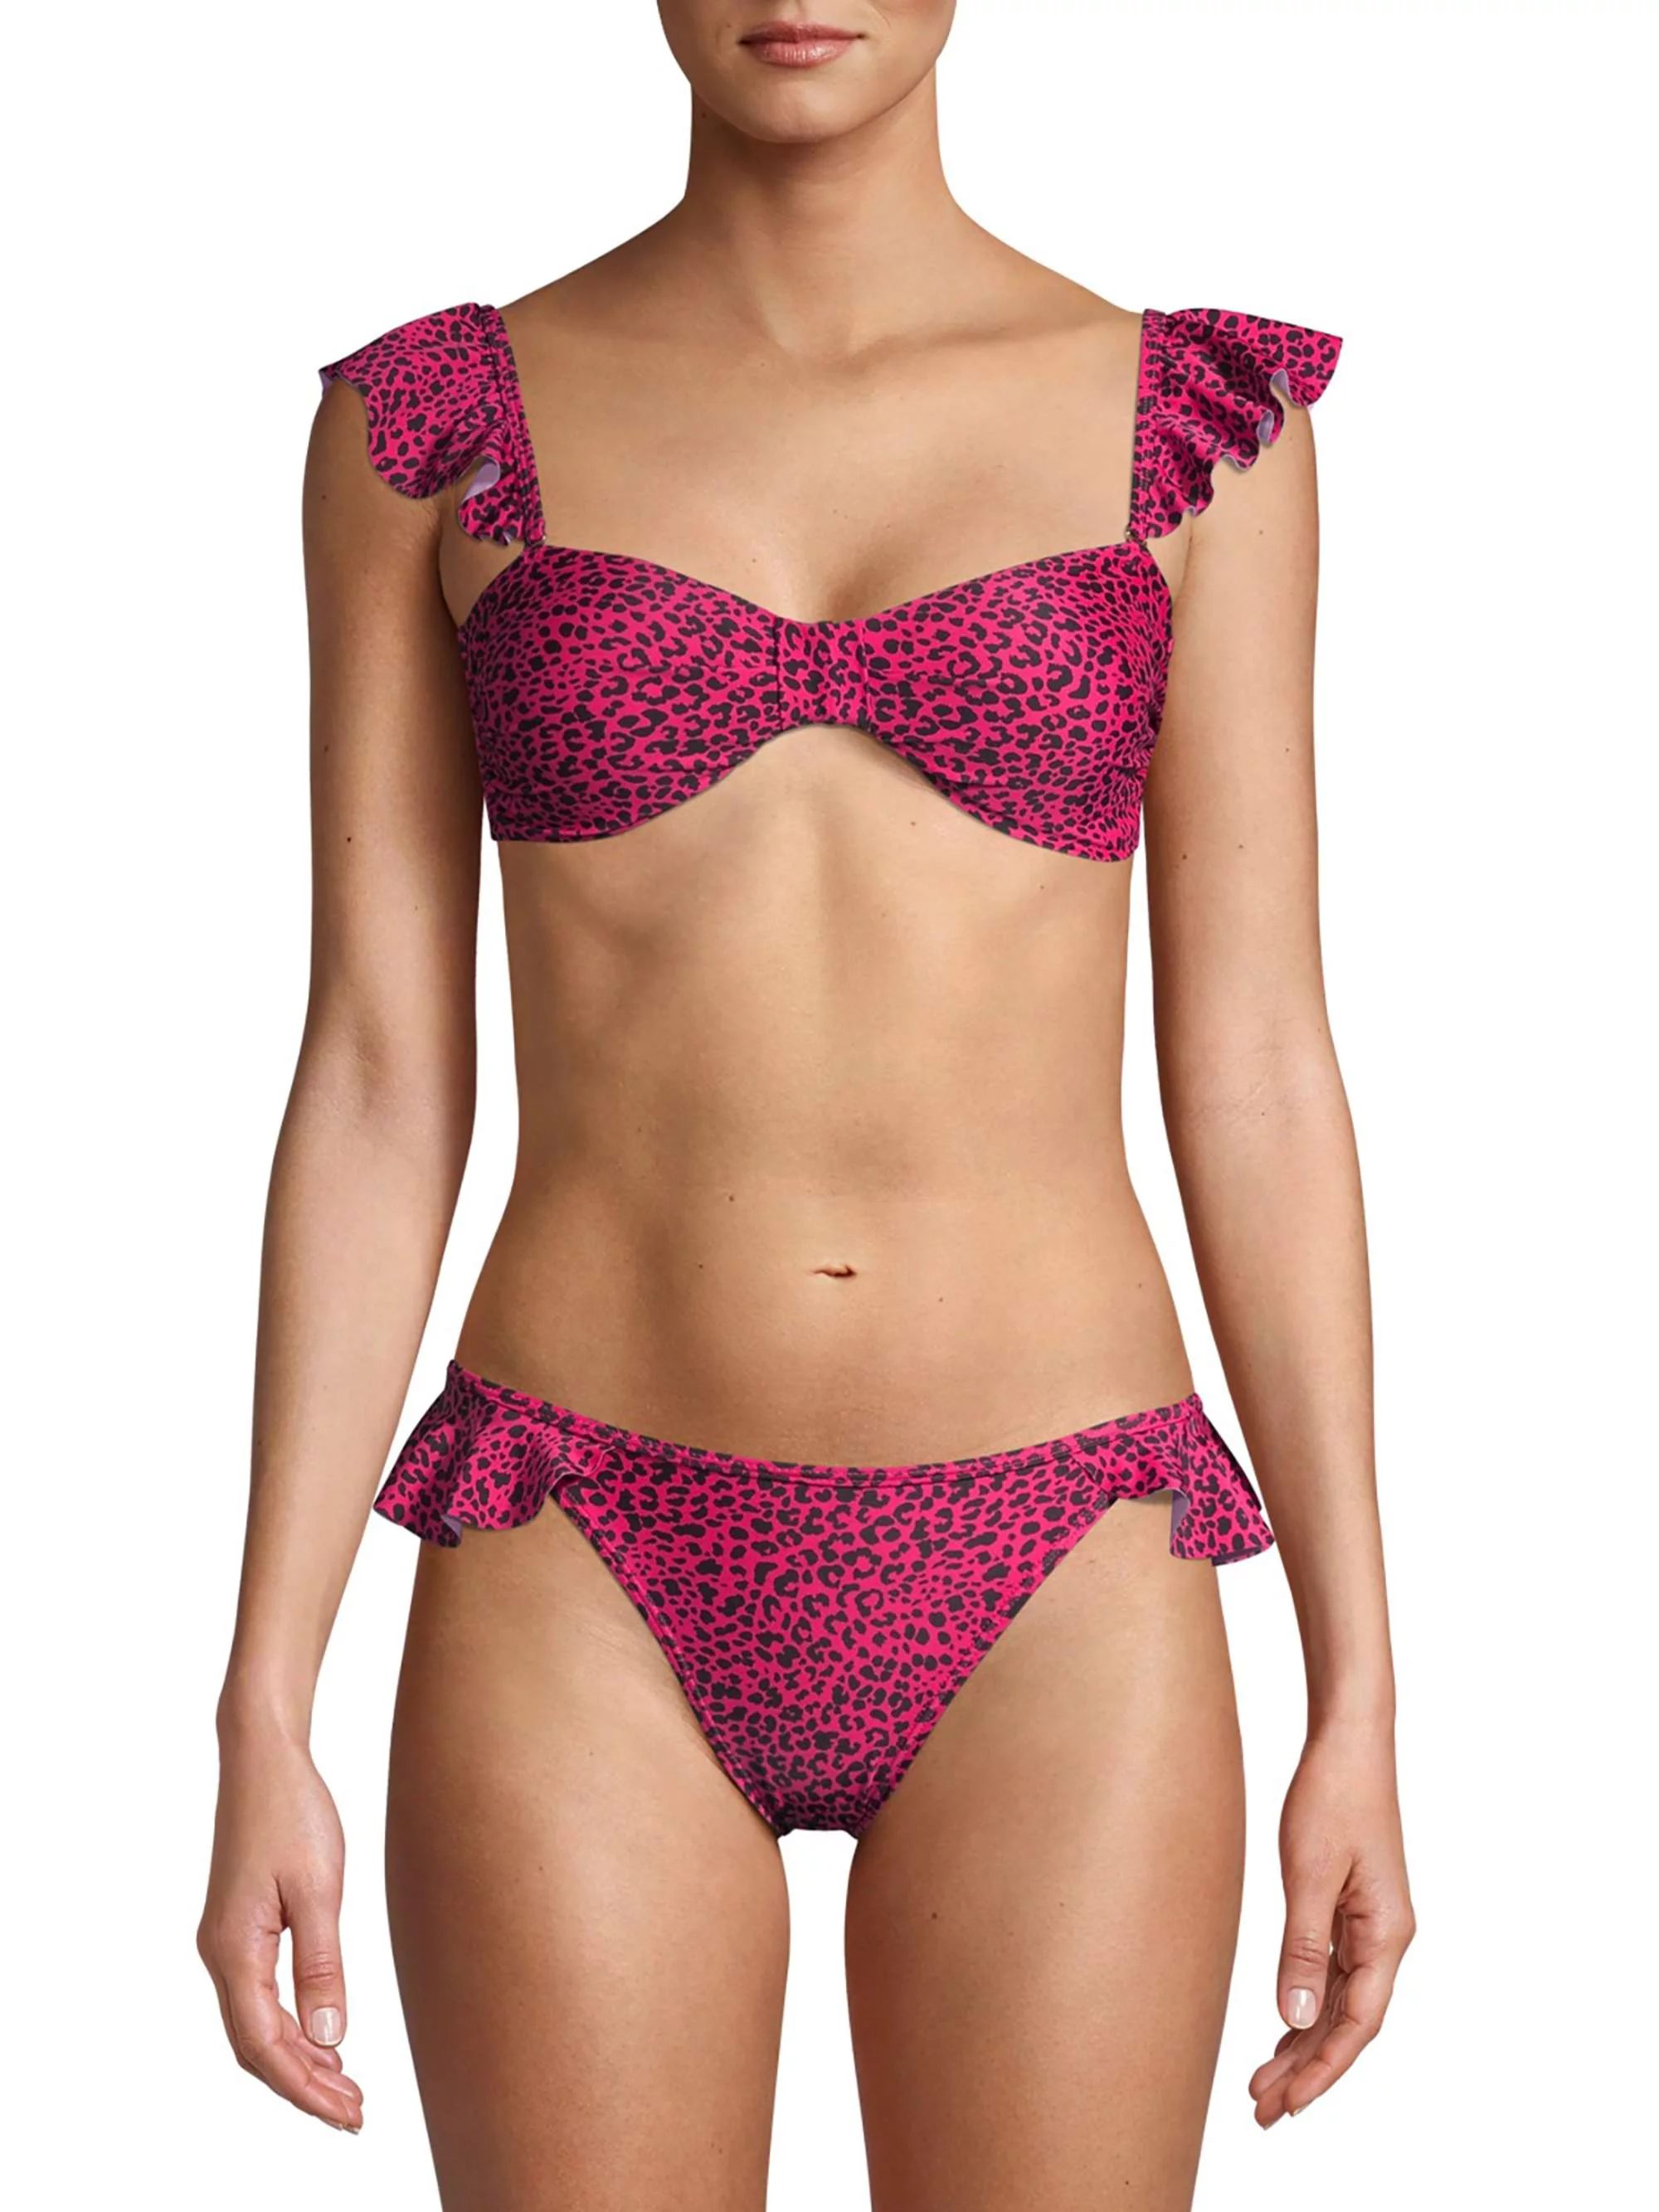 Juicy Couture 2-Piece Bandeau Bikini Swimsuit with Cap Sleeves and Scoop Bottom | Walmart (US)